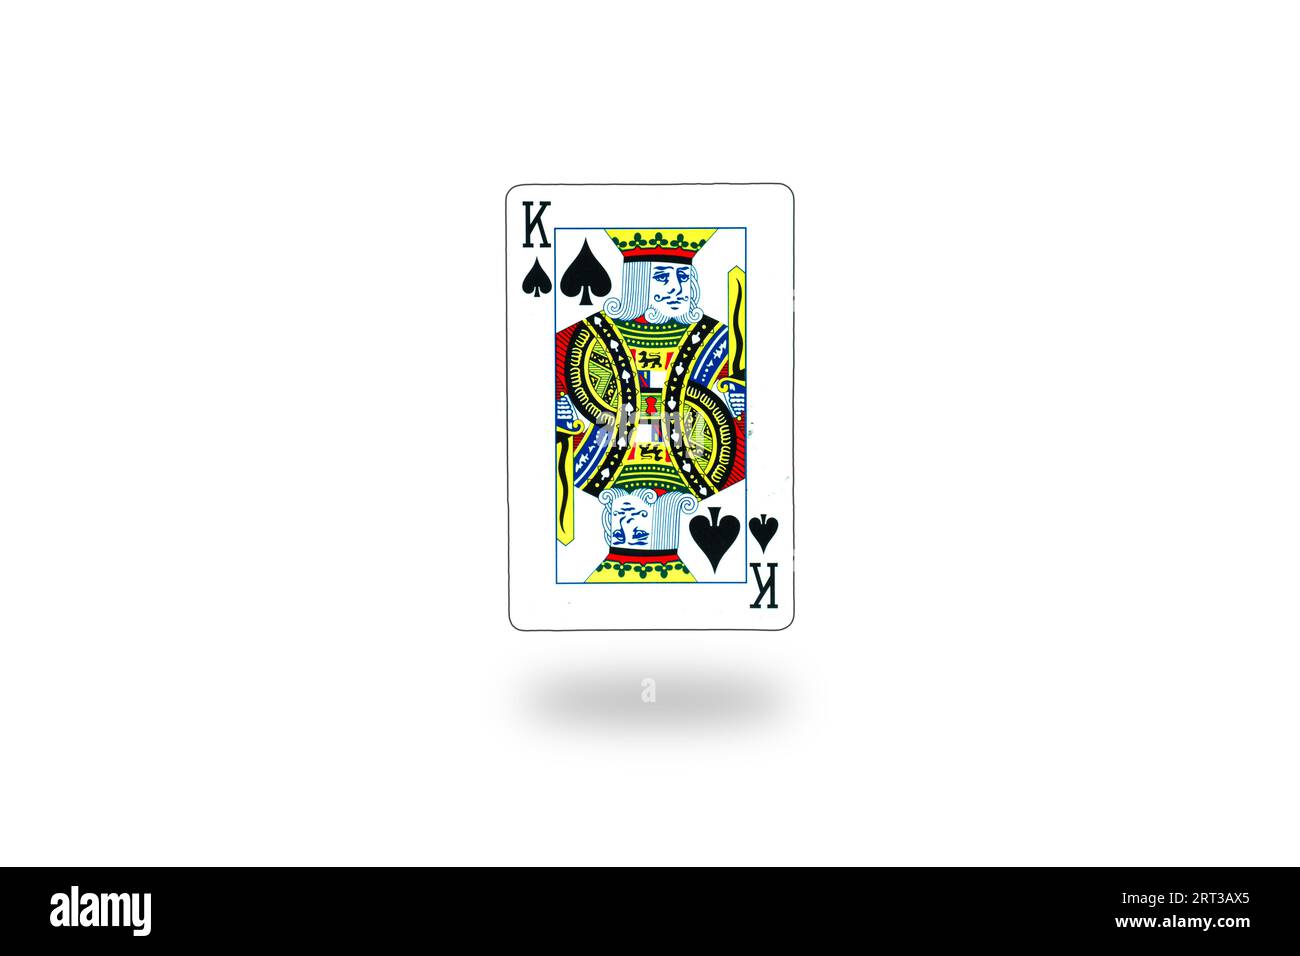 Royal king of spades playing card in the plain white background Stock Photo